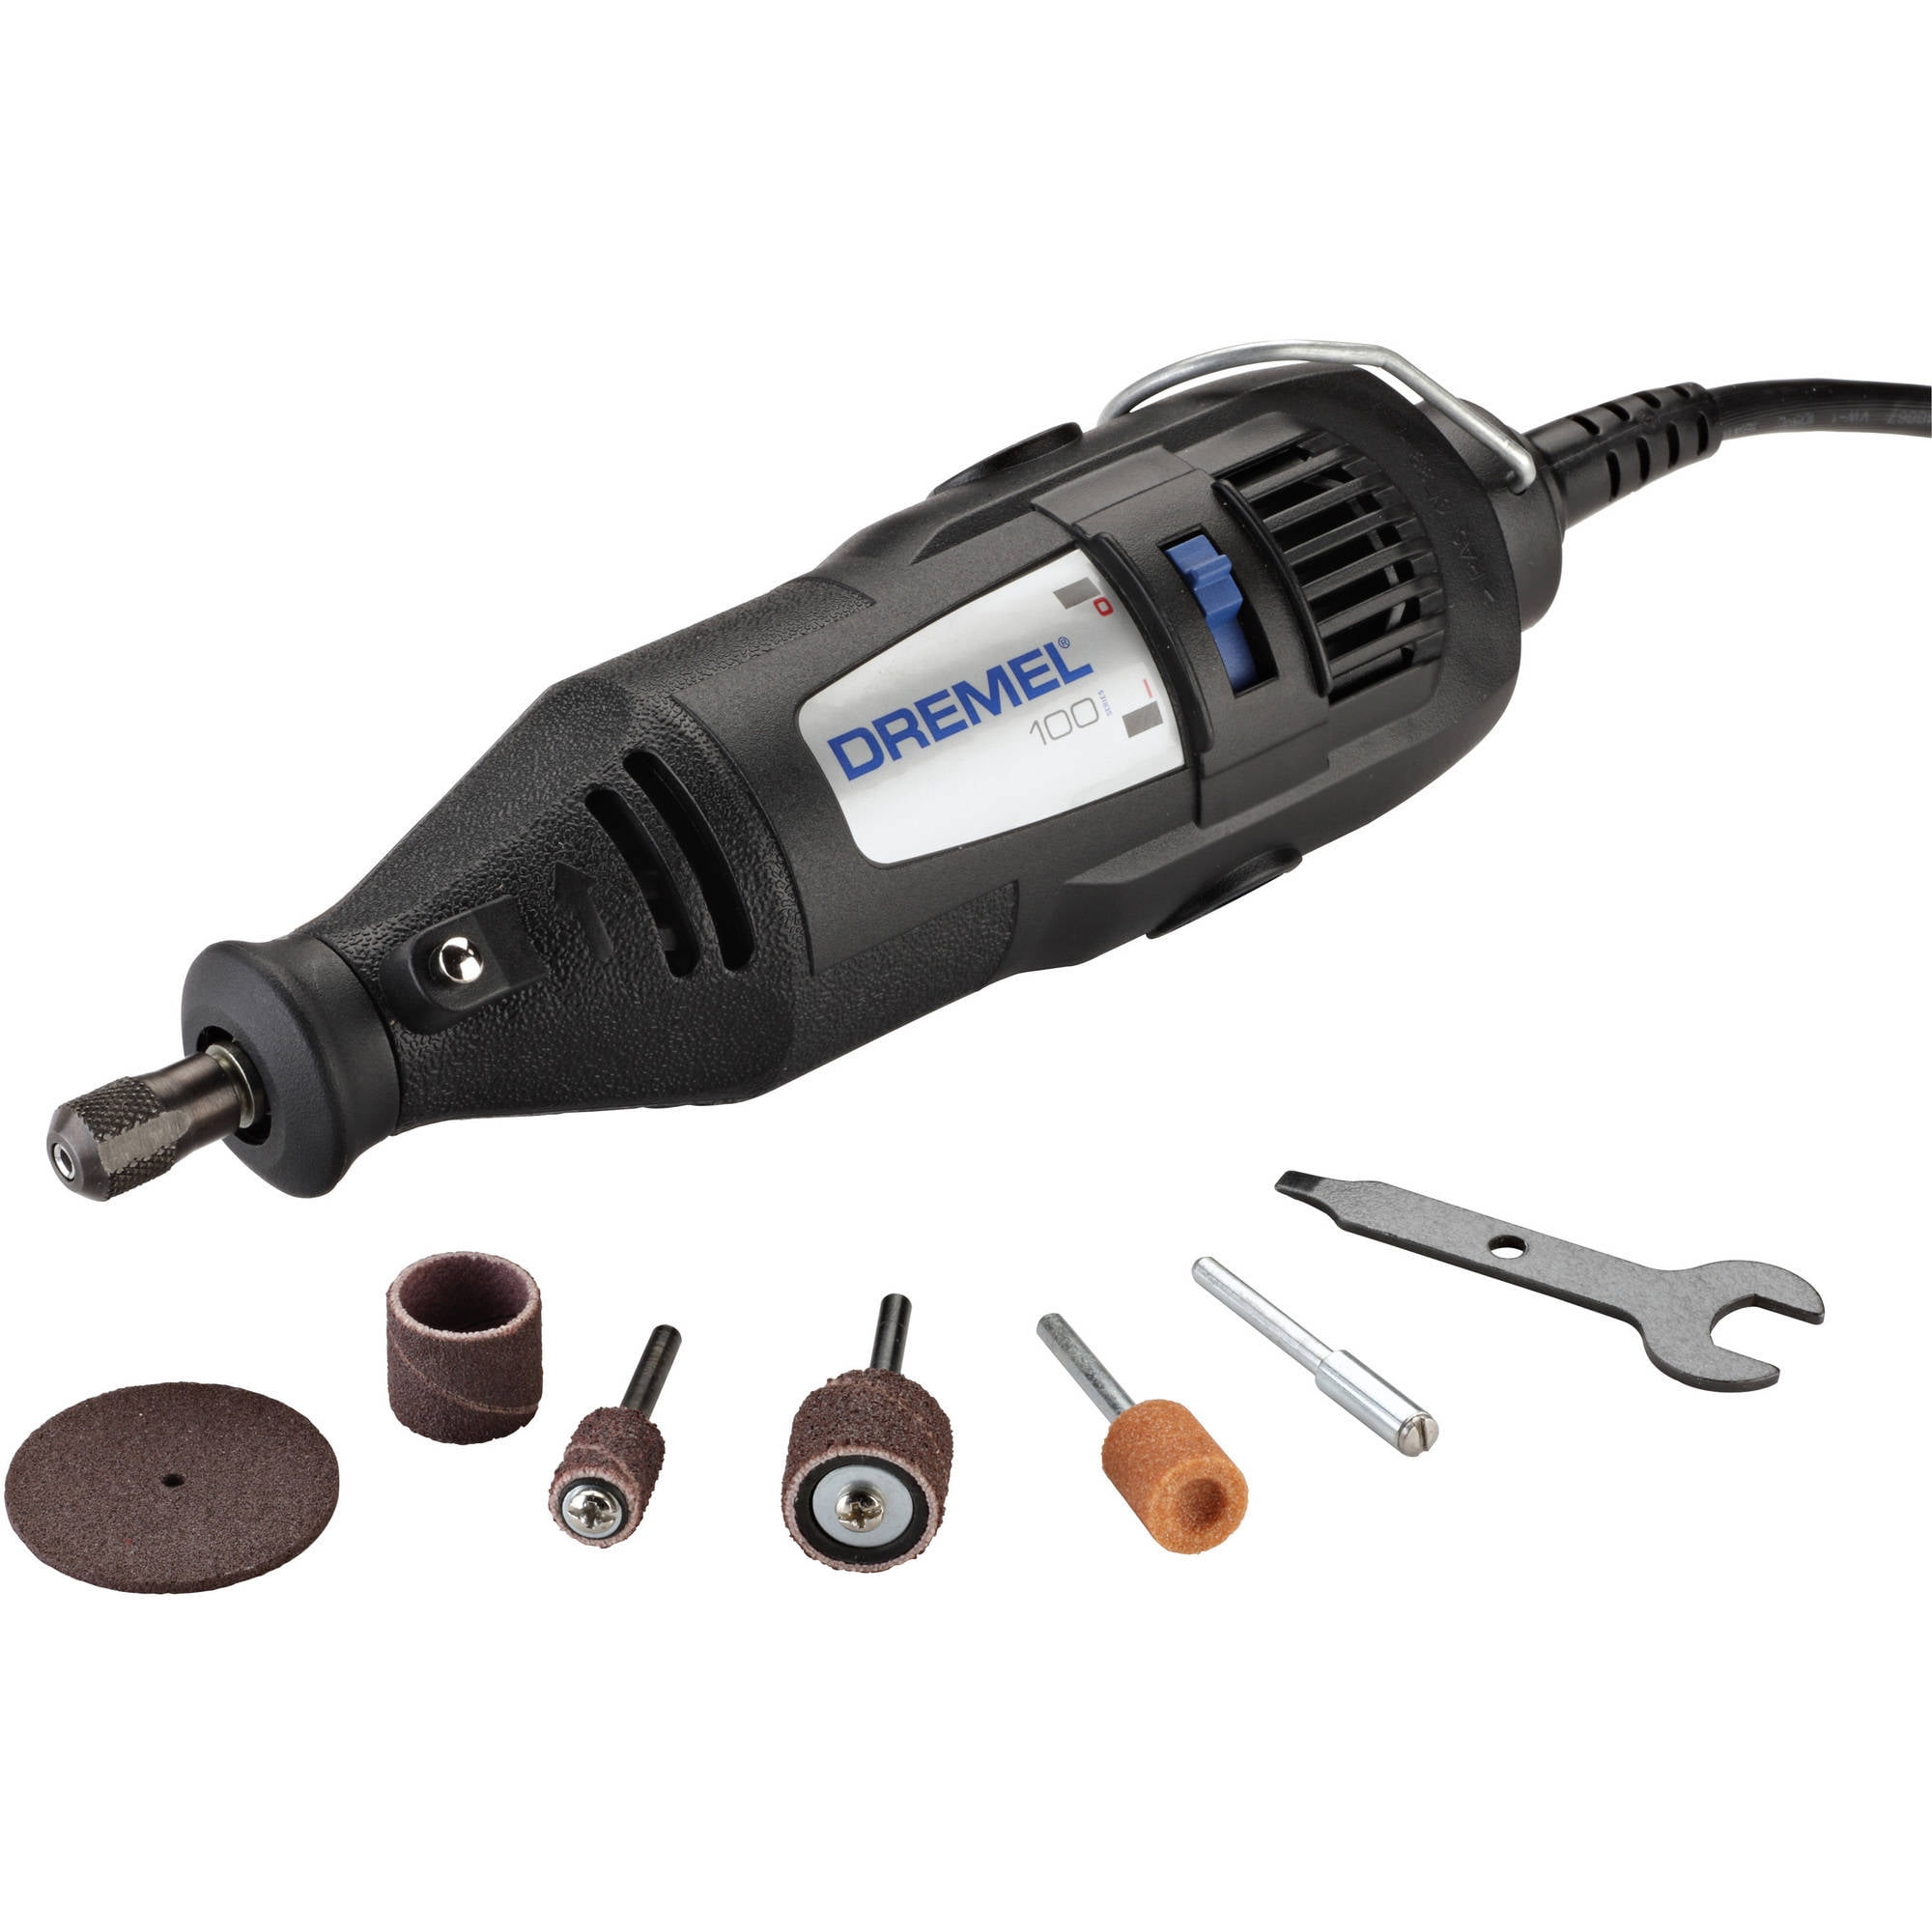 Dremel A550 Rotary Tool Shield Attachment Kit for Tool Models 3000 and 7760